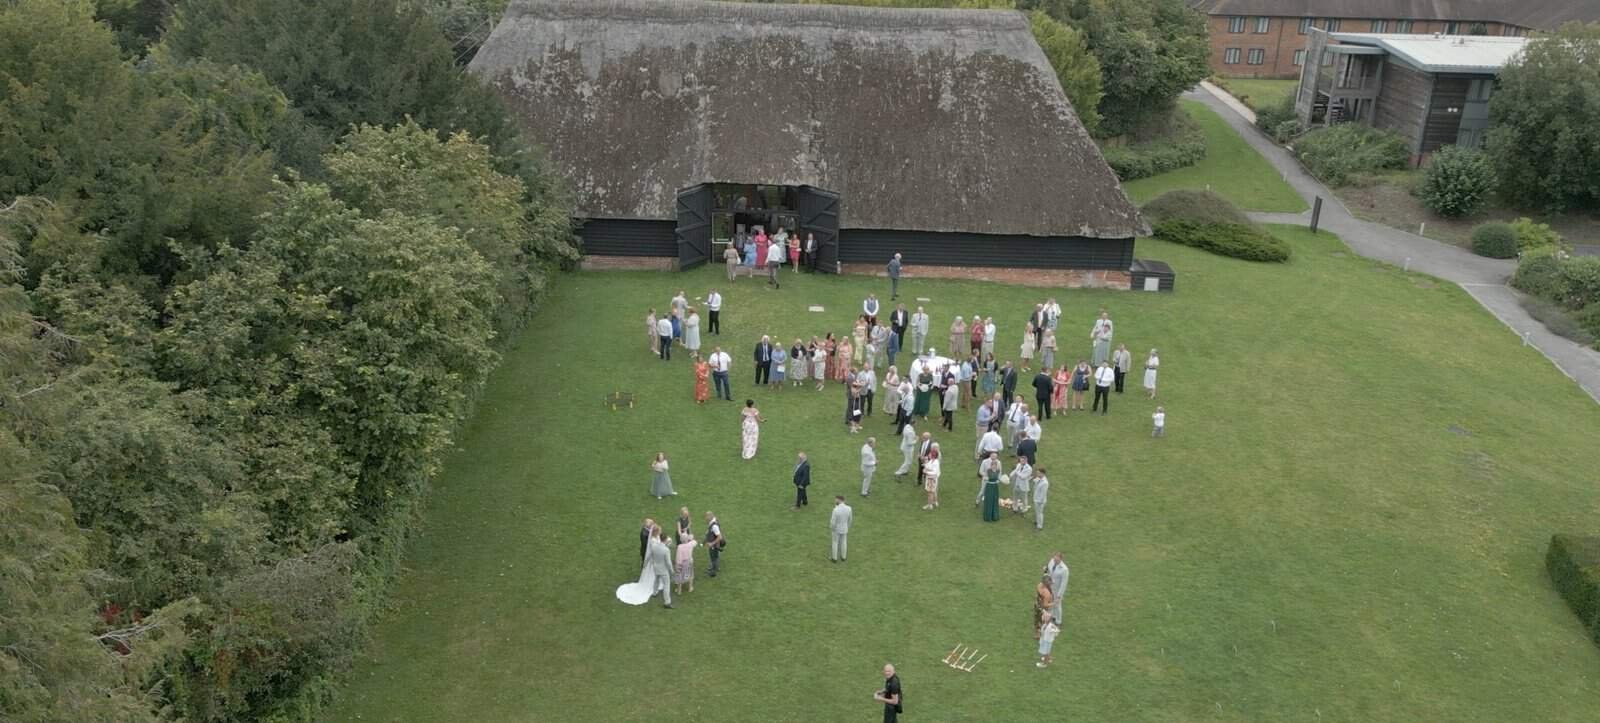 Outdoor wedding gathering near thatched roof structure.